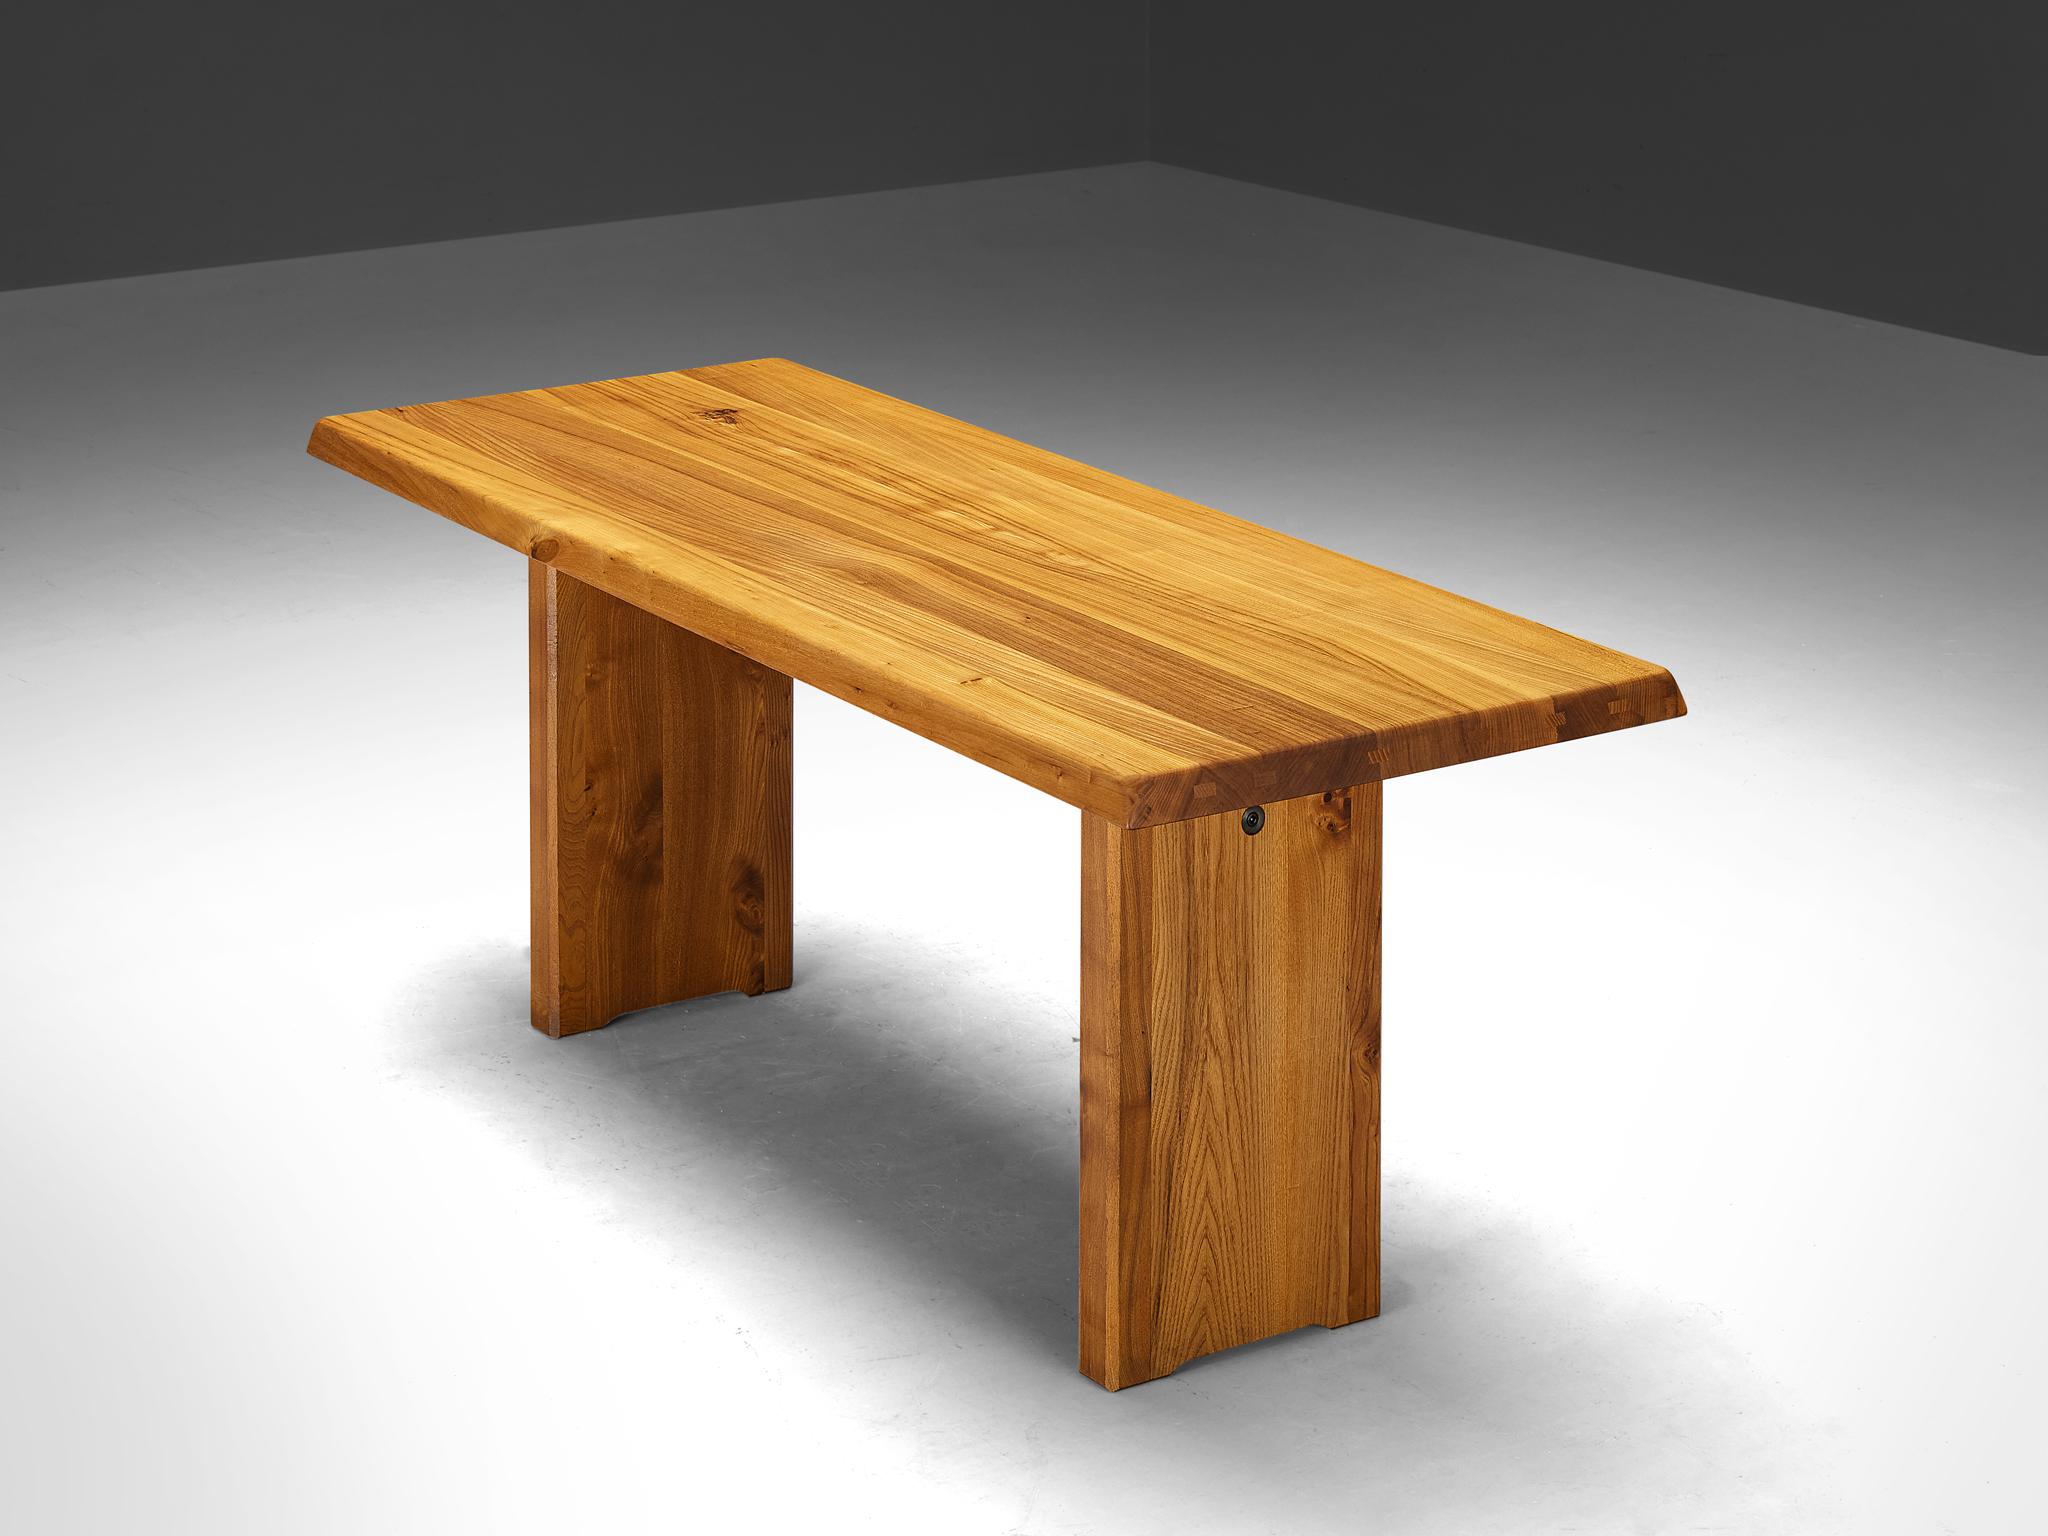 Pierre Chapo, dining table model 'T14B', elm, France, design 1964

This T14B dining table is one of the early editions designed by Pierre Chapo, known for his hallmark use of solid elmwood and a commitment to pure and clean design and construction